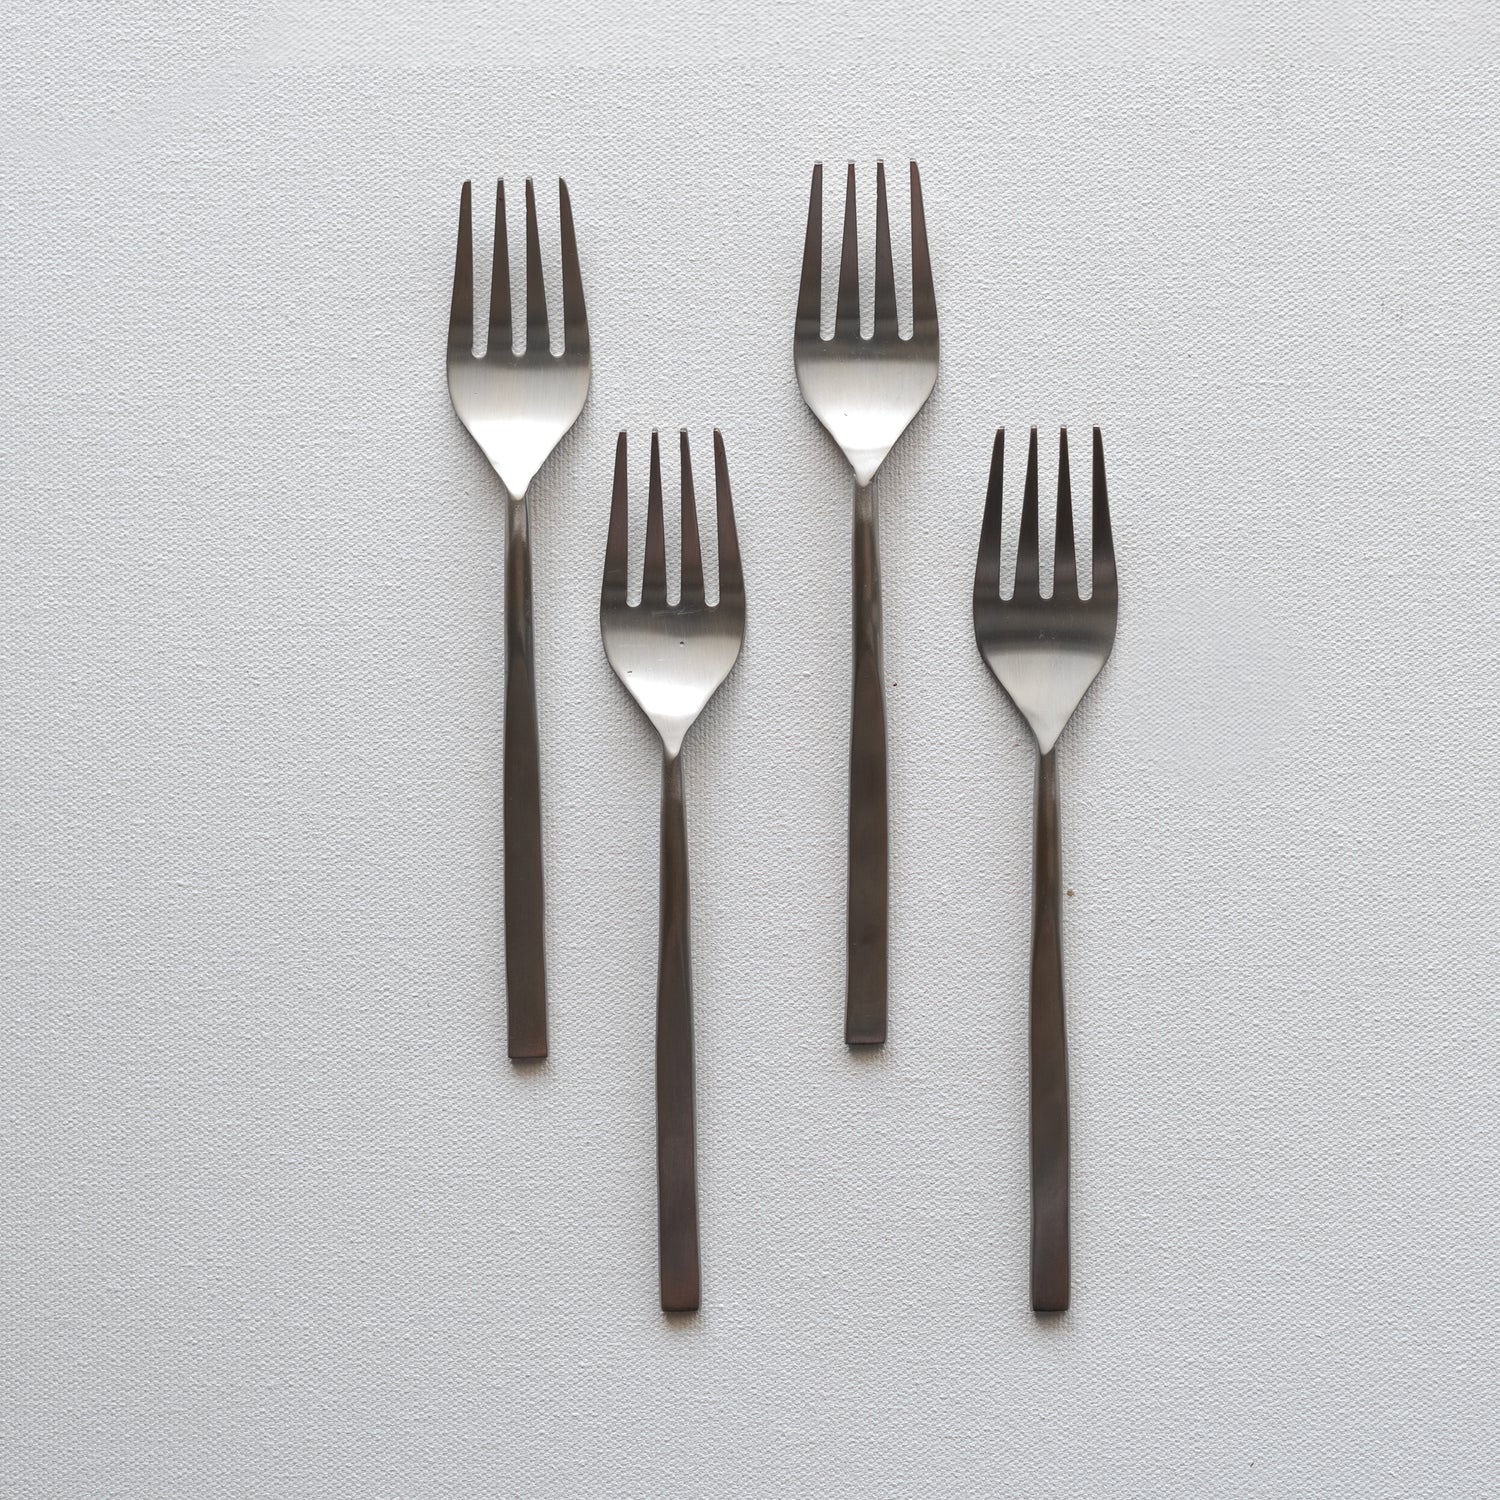 Fleck Wabi Dinner Forks set of 4 made with stainless steel